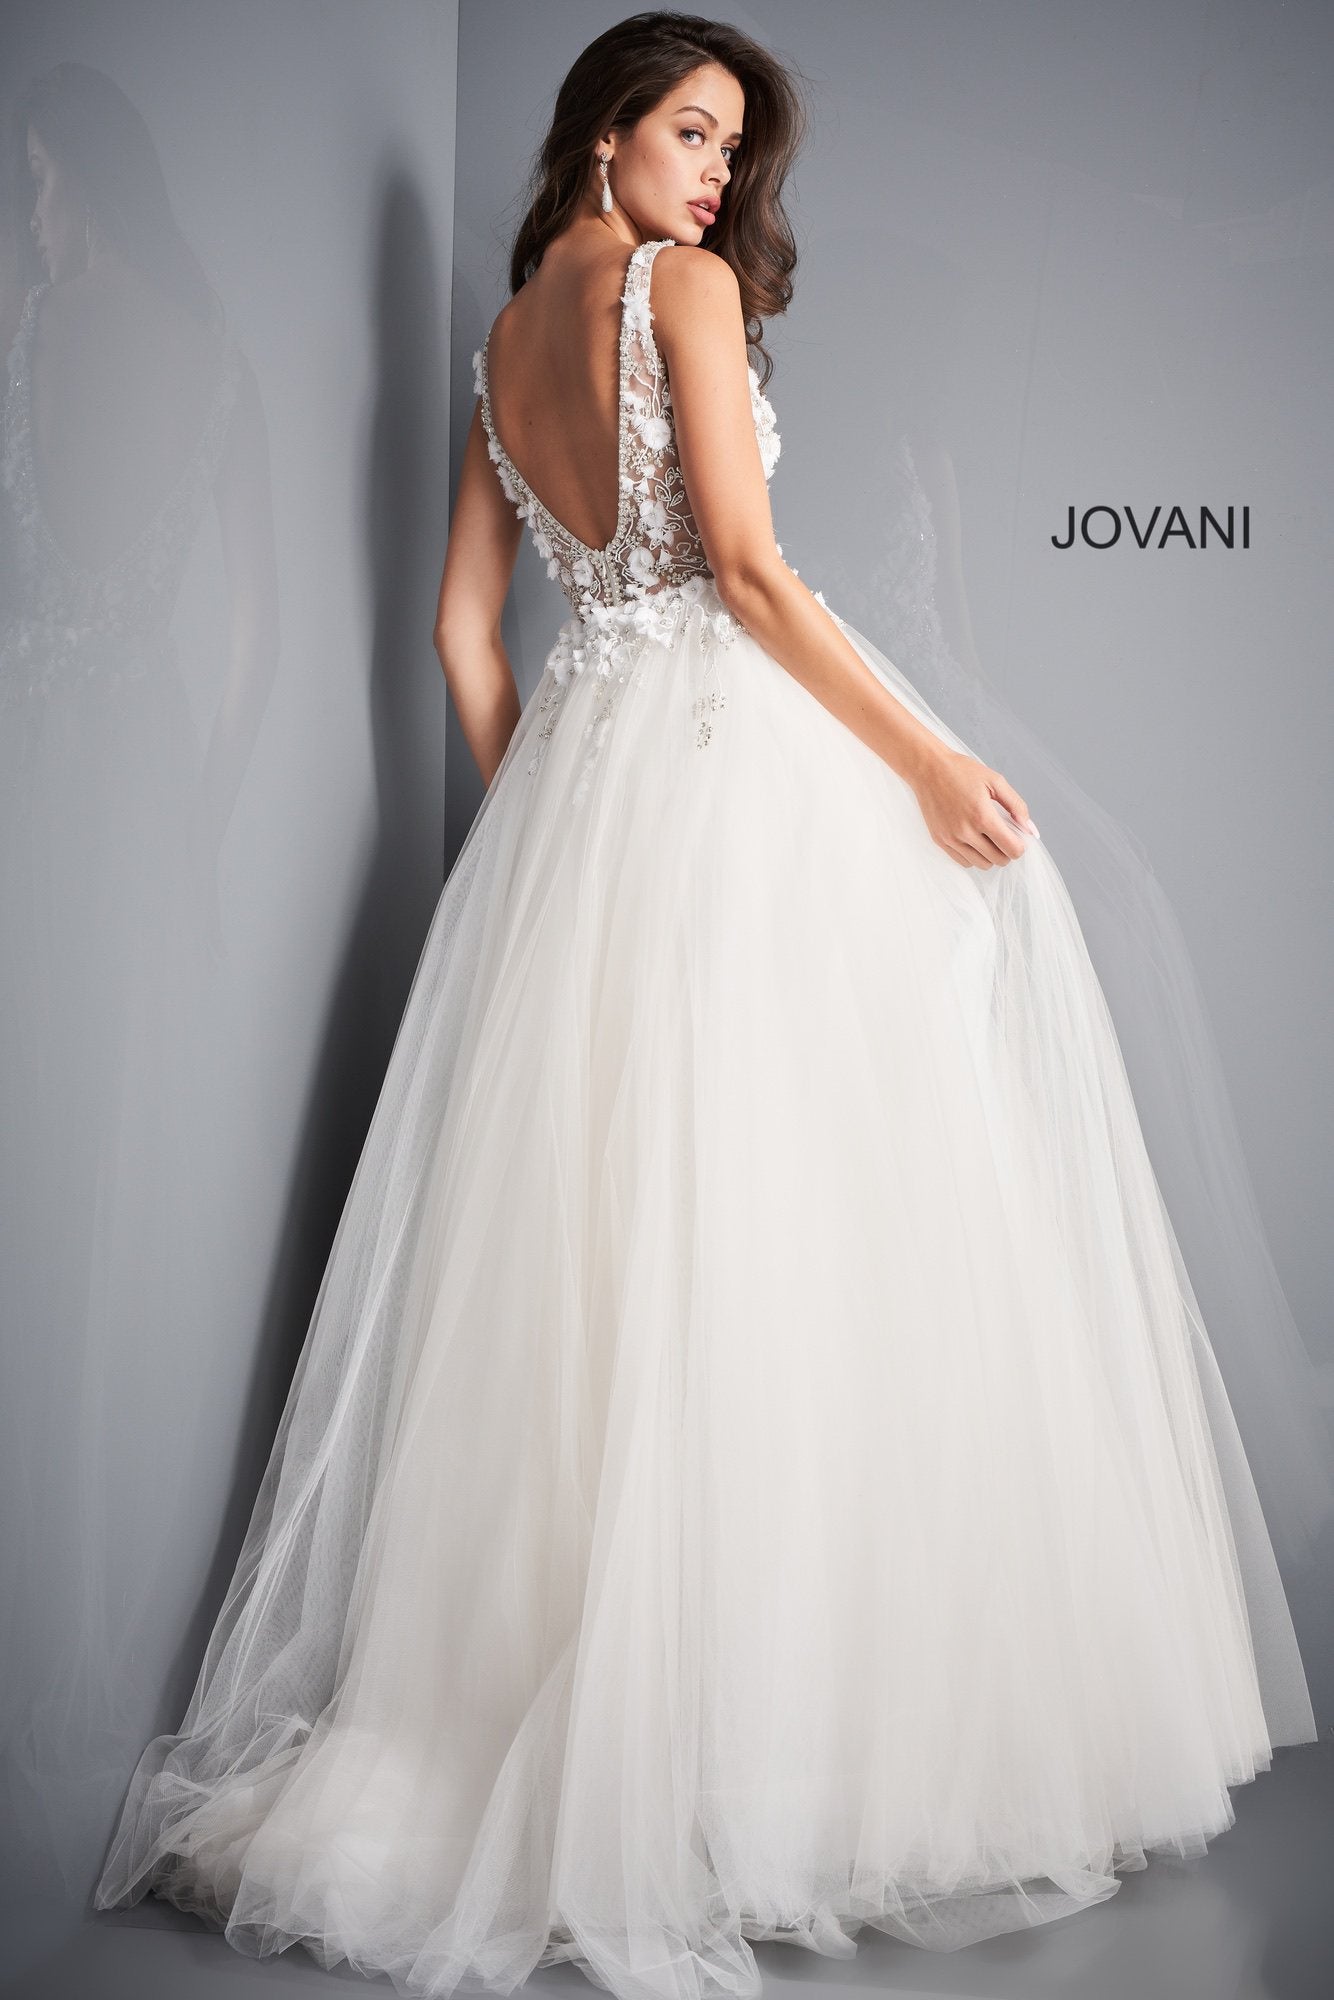 Jovani 3110 is a stunning tulle ball gown Prom Dress. Embellished 3D Floral Appliques on Sheer Illusion Bodice. Deep V Neckline & Back.  This gown would be a Perfect Sexy Wedding Dress In Ivory!  Available Sizes: 00, 0, 2, 4, 6, 8, 10, 12, 14, 16, 18, 20, 22, 24  Available Colors: blue, ivory, red